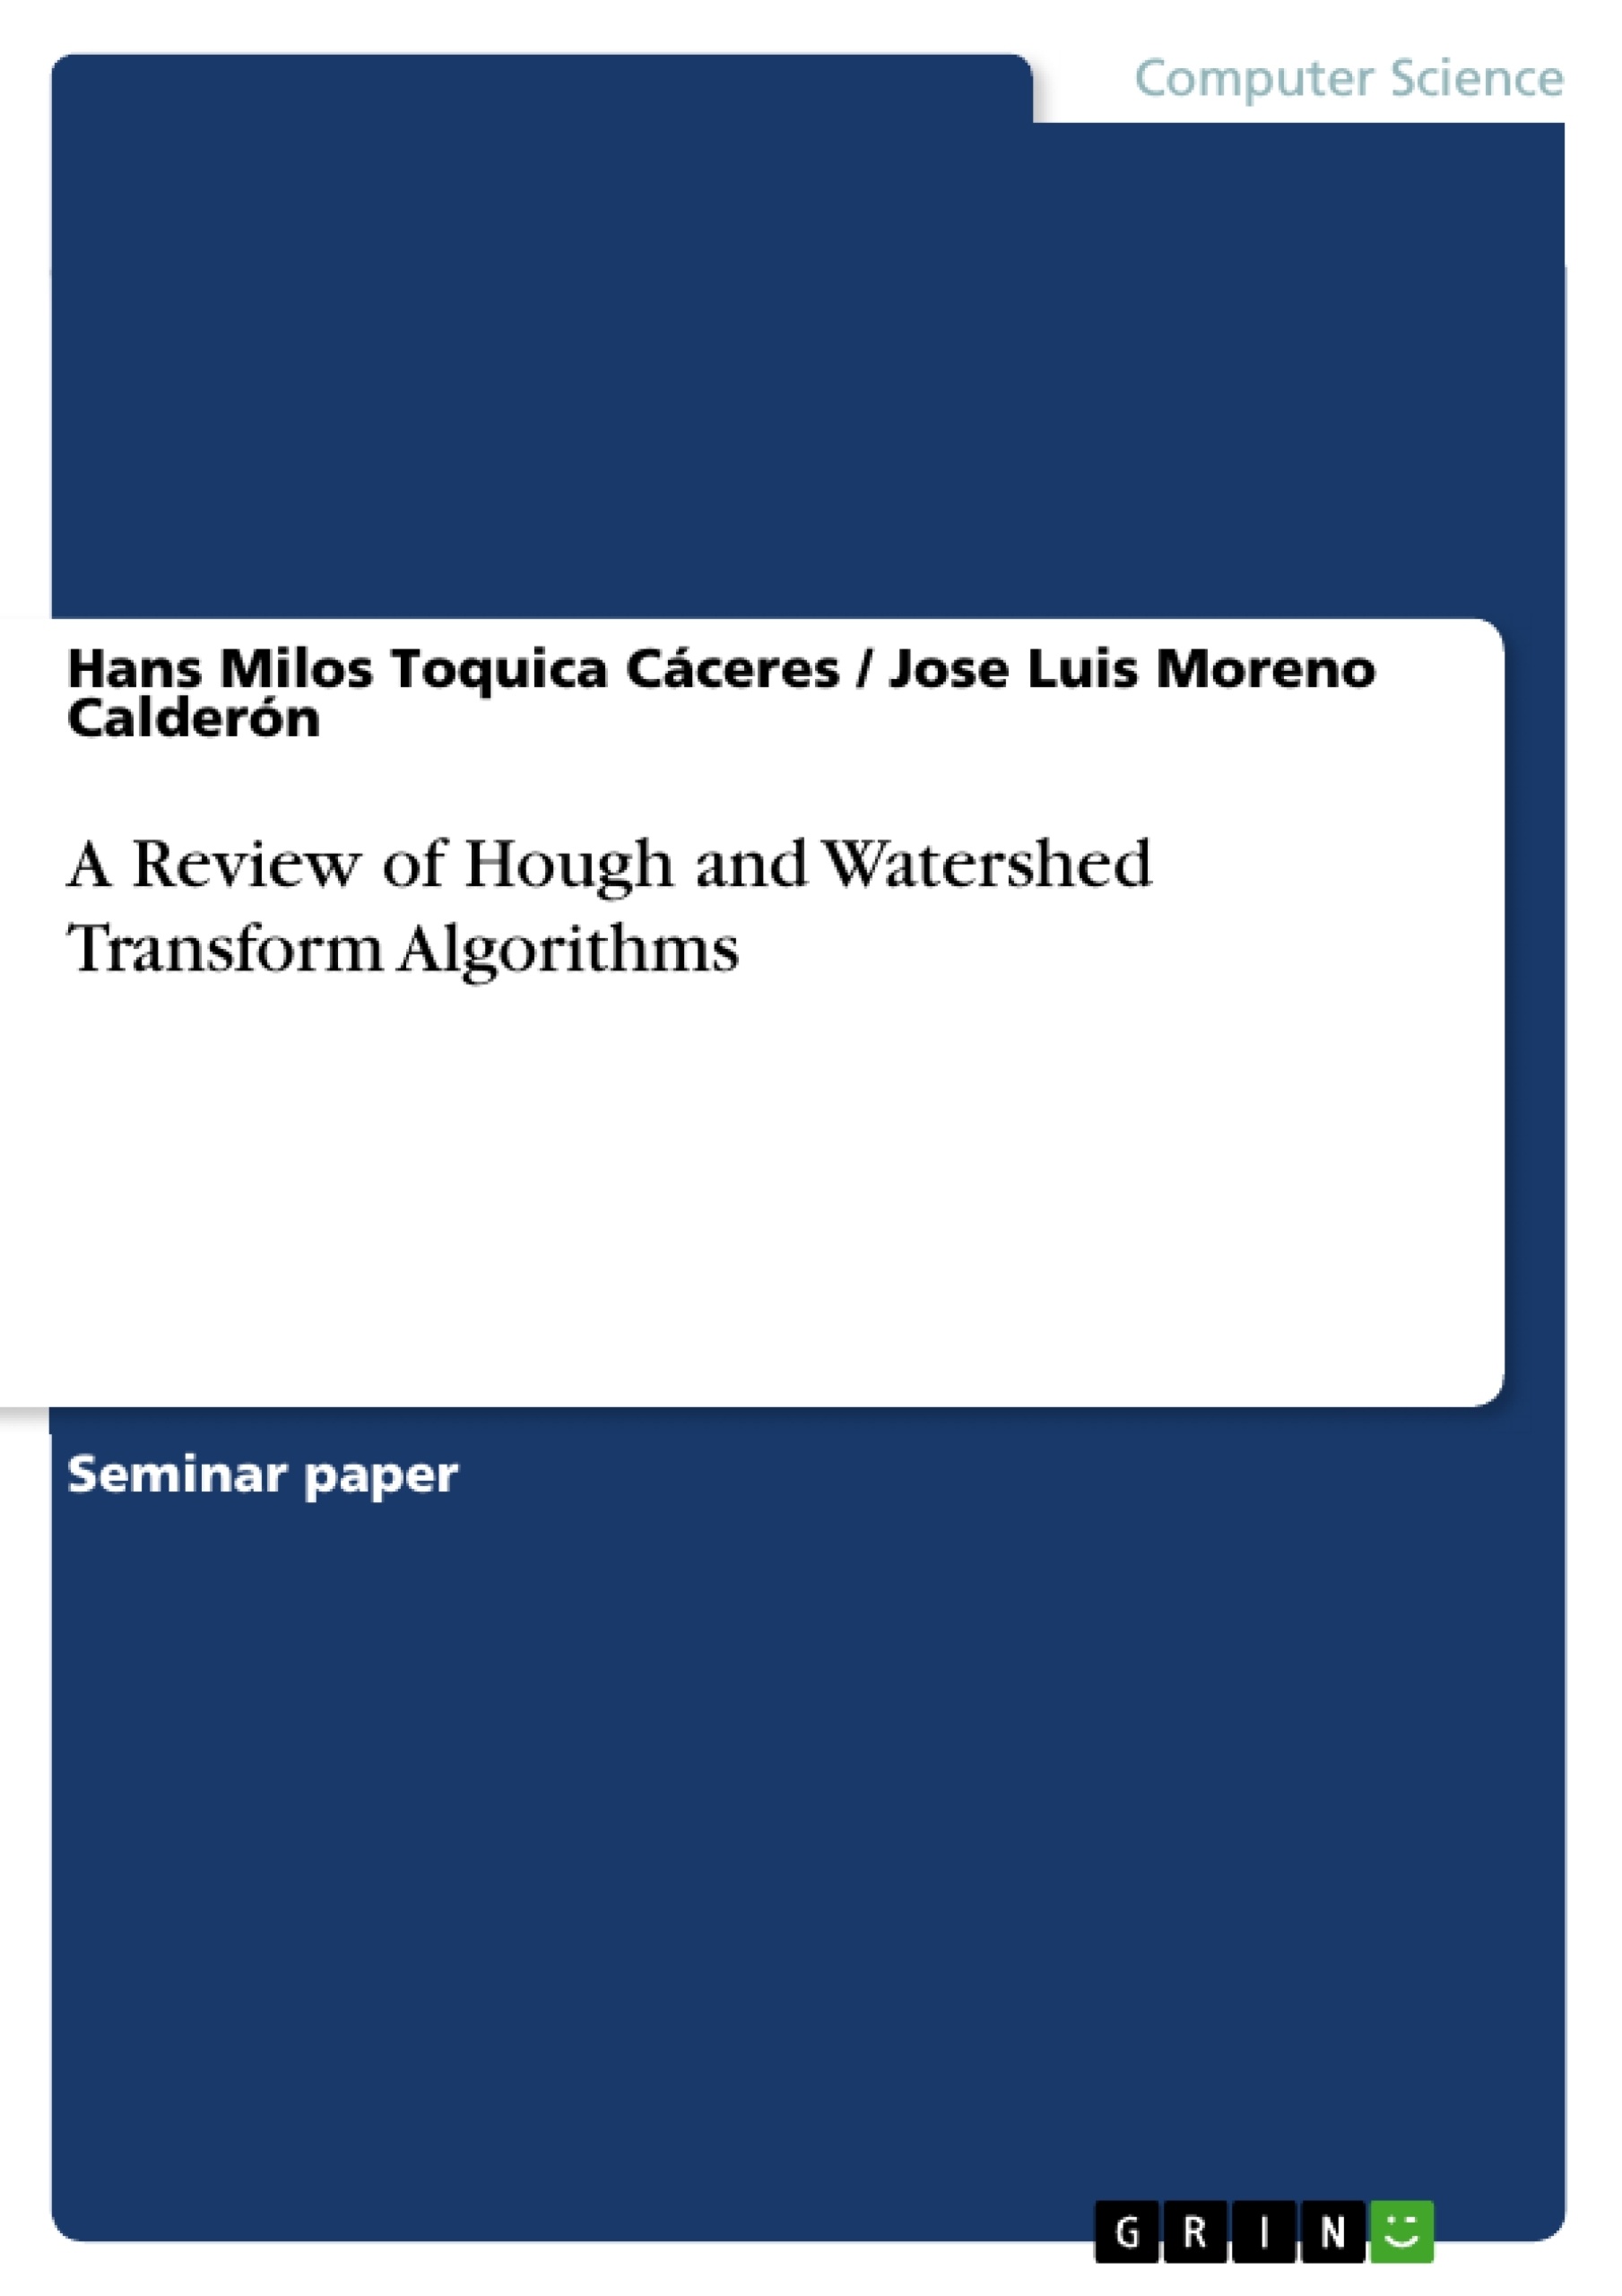 Title: A Review of Hough and Watershed Transform Algorithms